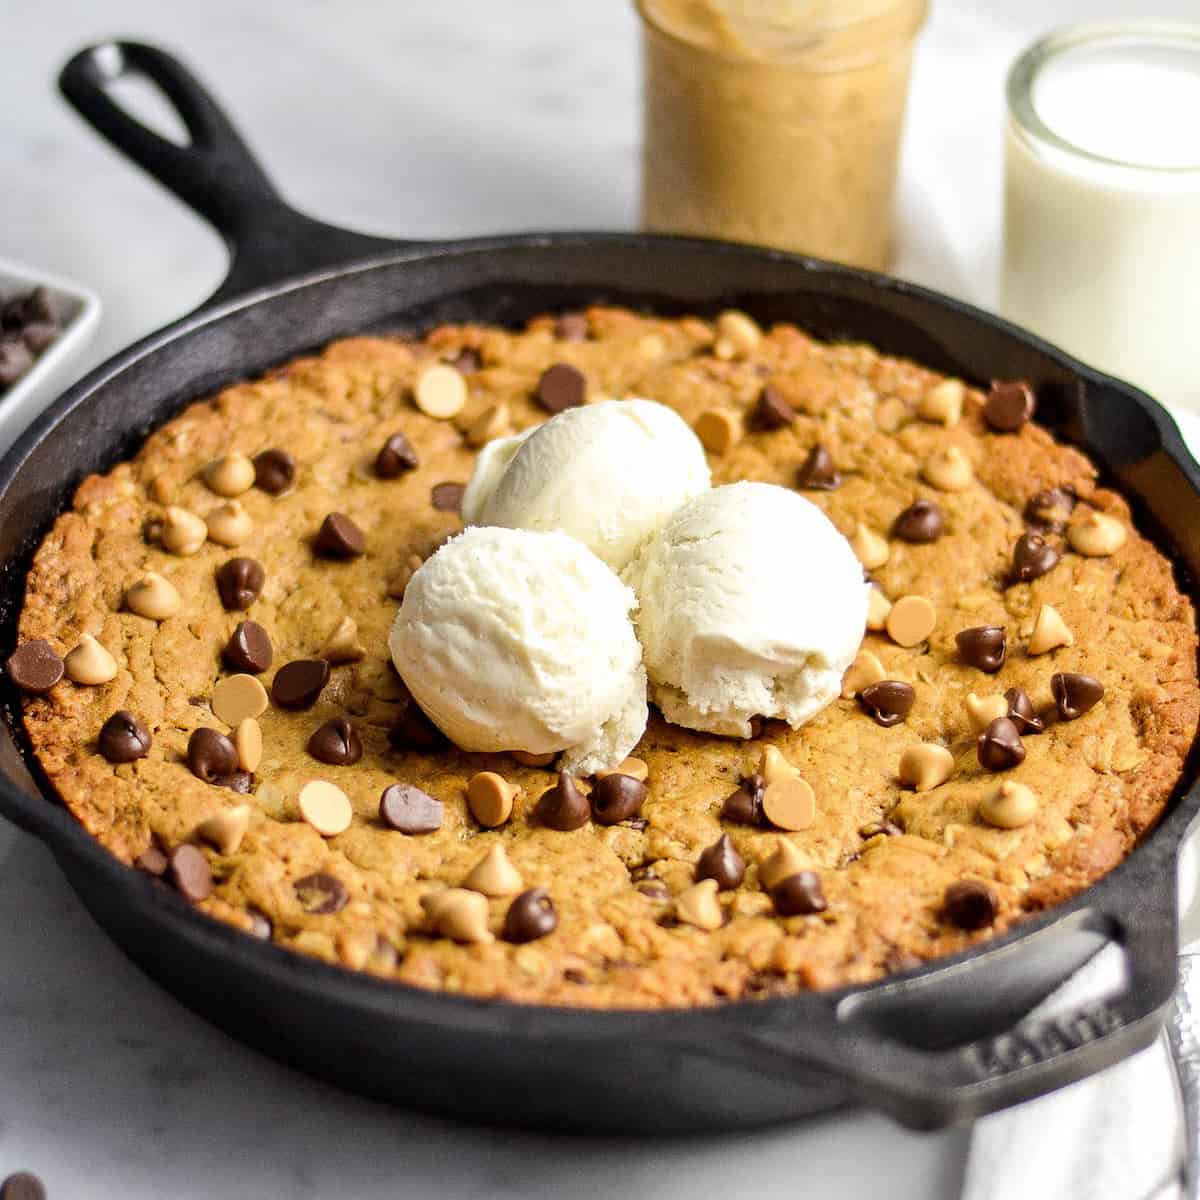 Front view of Healthy Skillet Peanut Butter Cookie with three scoops of ice cream on top